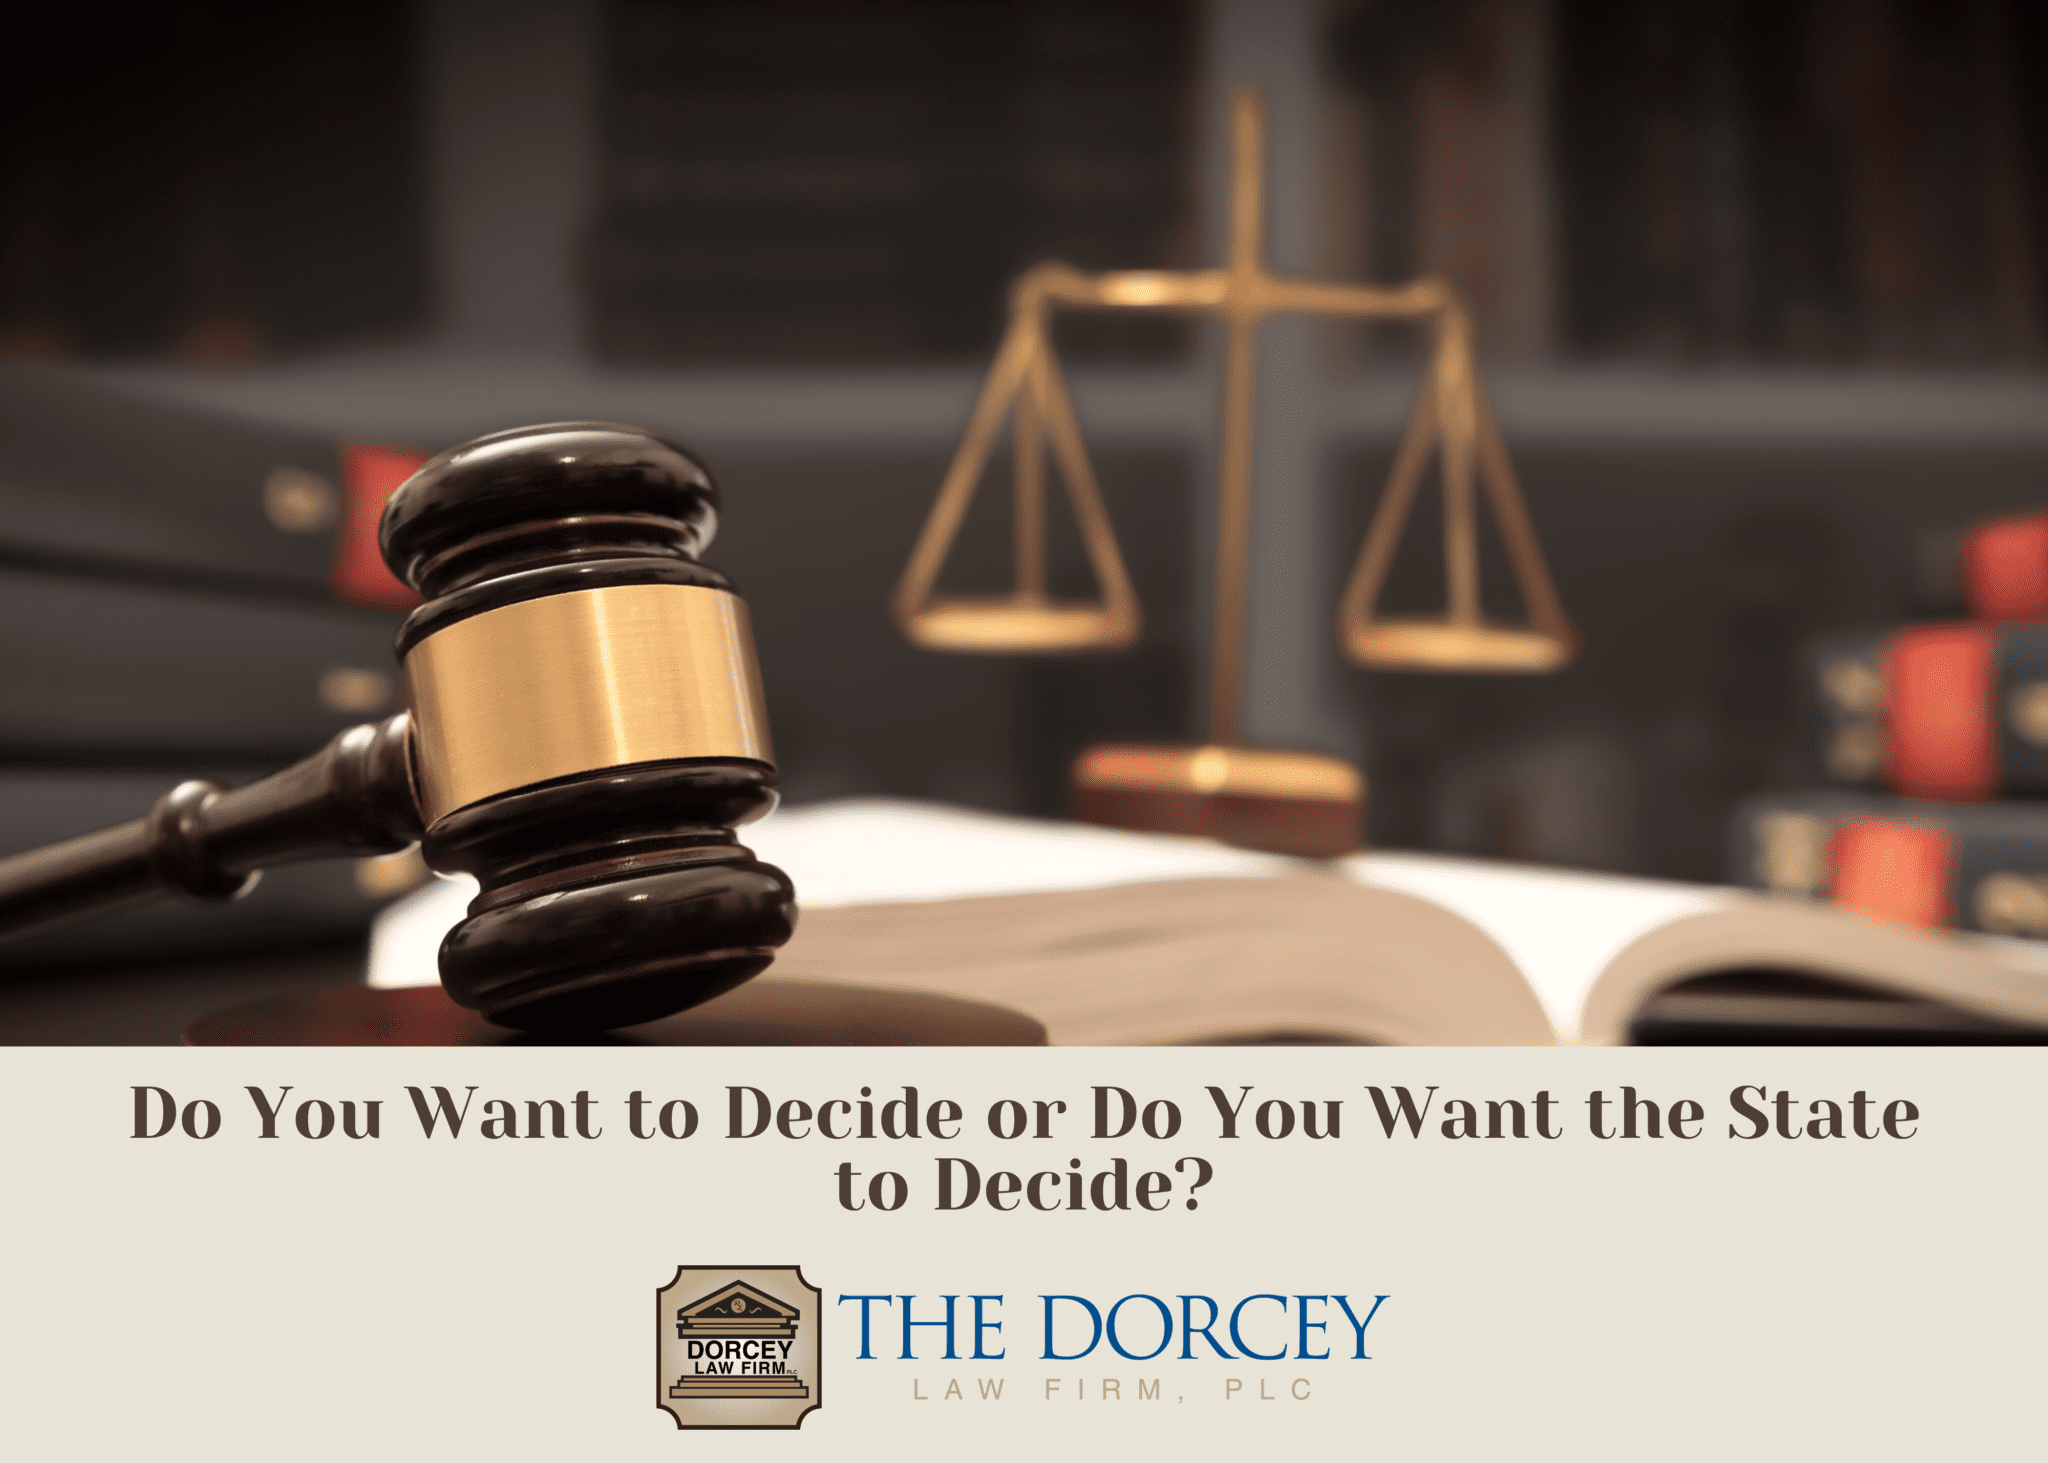 Do You Want to Decide or Do You Want the State to Decide?